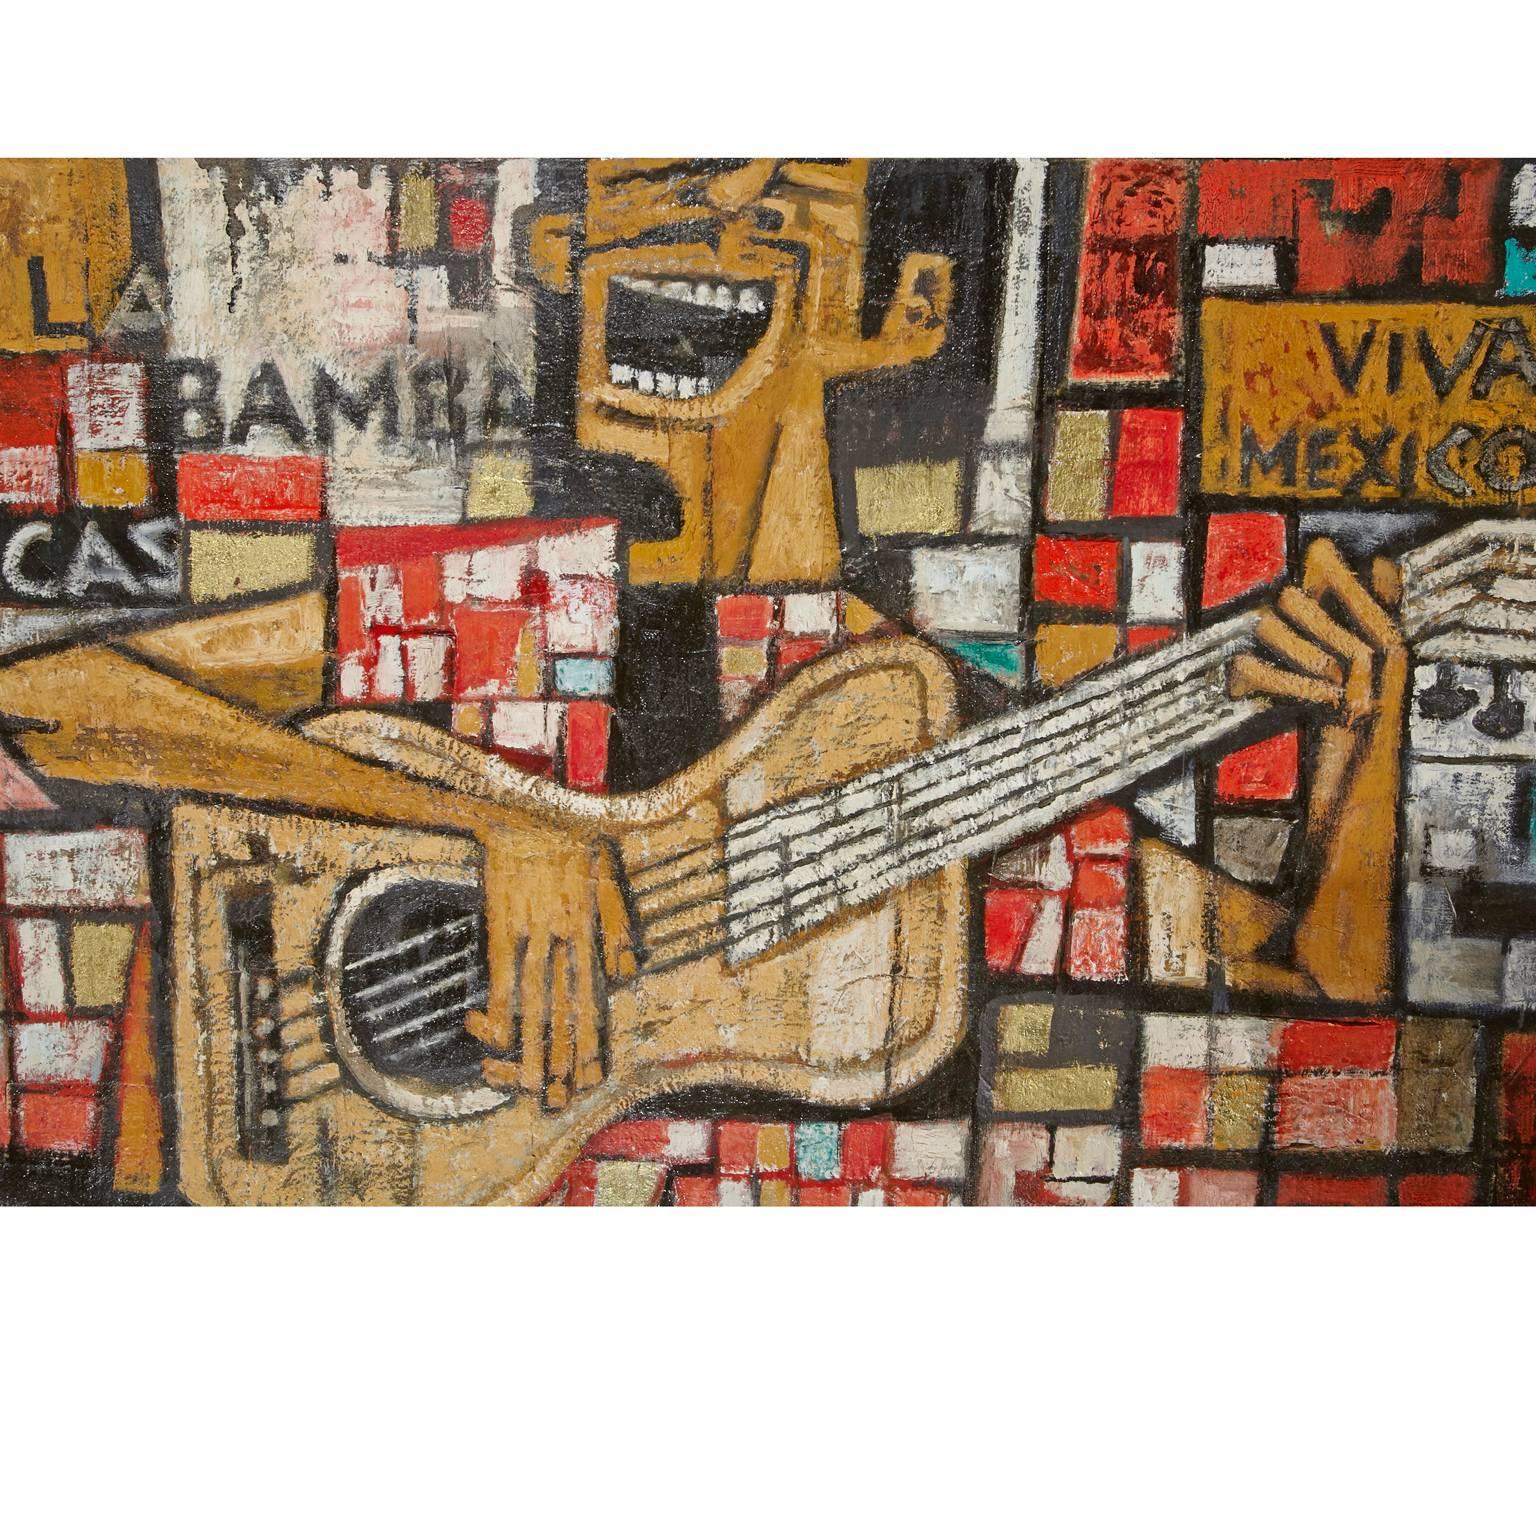 Large oil on canvas by Tucson, AZ. artist Eugene MacKaben.  Colorful Reds, Gold, Black and White colors with a Mexico Theme of Guitar player.

Eugene Henry Mackaben (1920 - 1984) 
A World War II veteran from Chicago, Mackaben received a diploma in